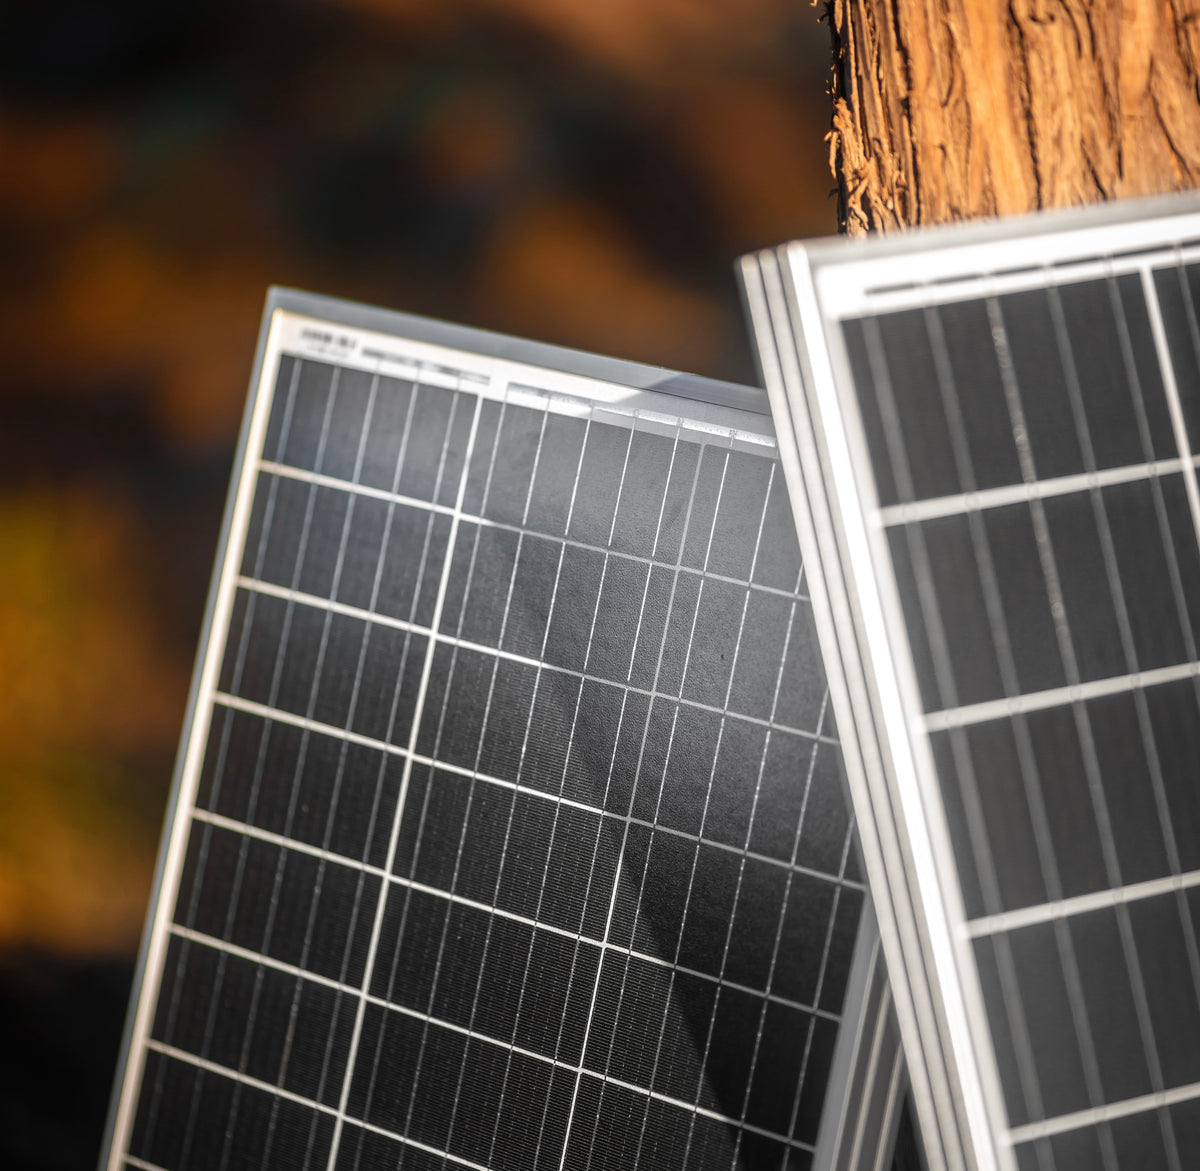 What solar panels are the best in Nigeria?